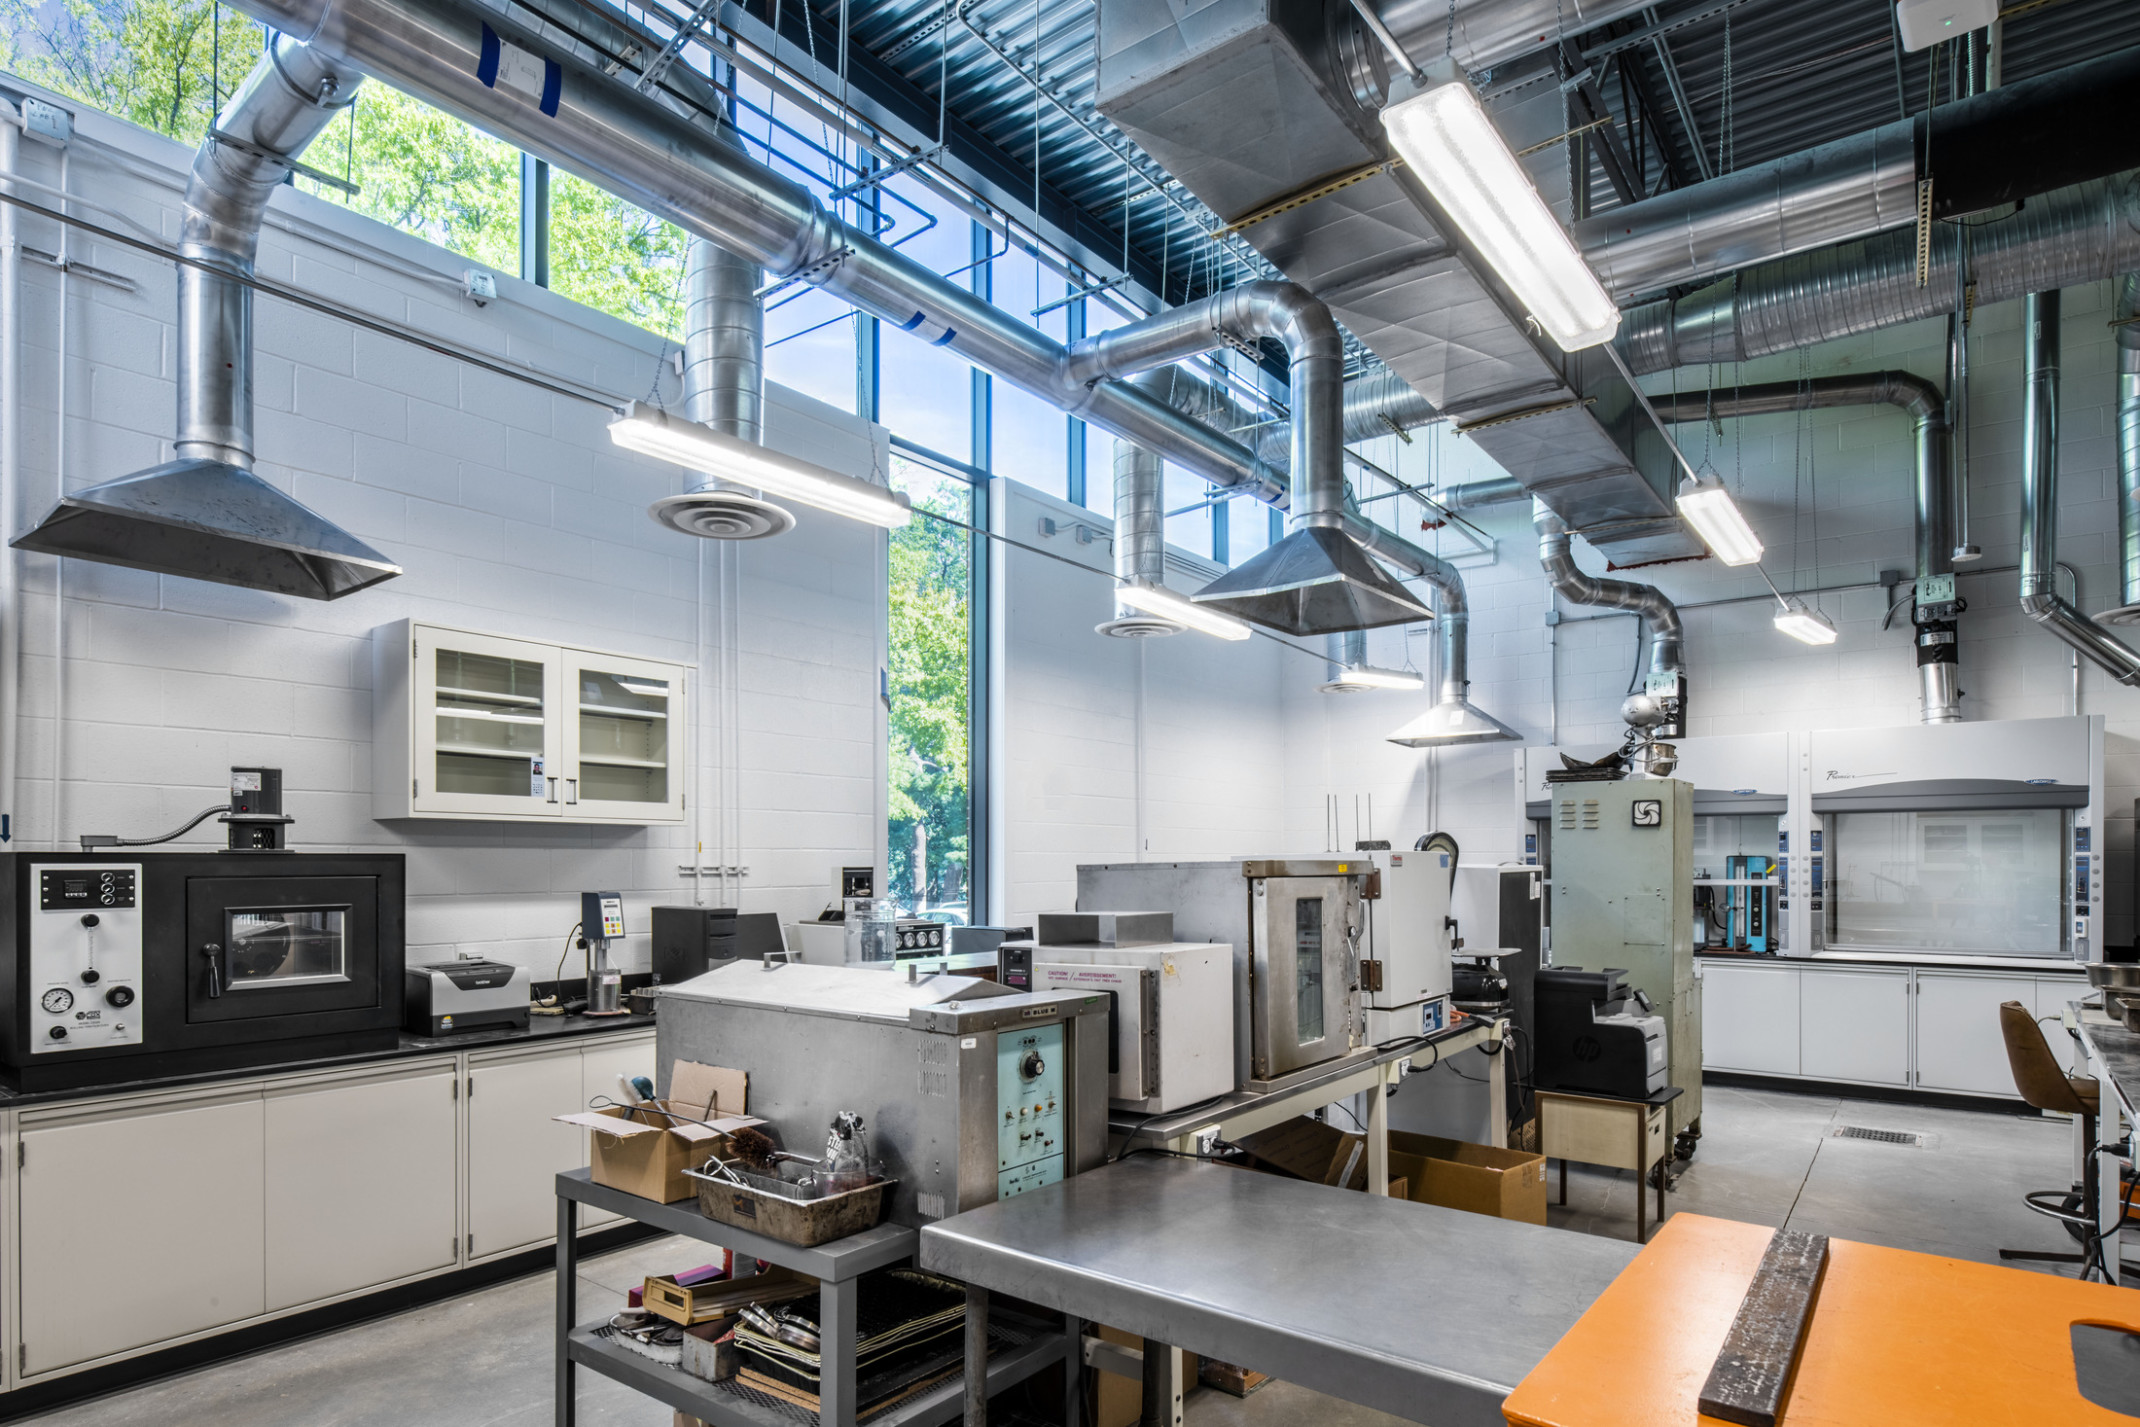 Double height white cement block lab with exposed ducts above lab equipment. View, left, through windows to green space